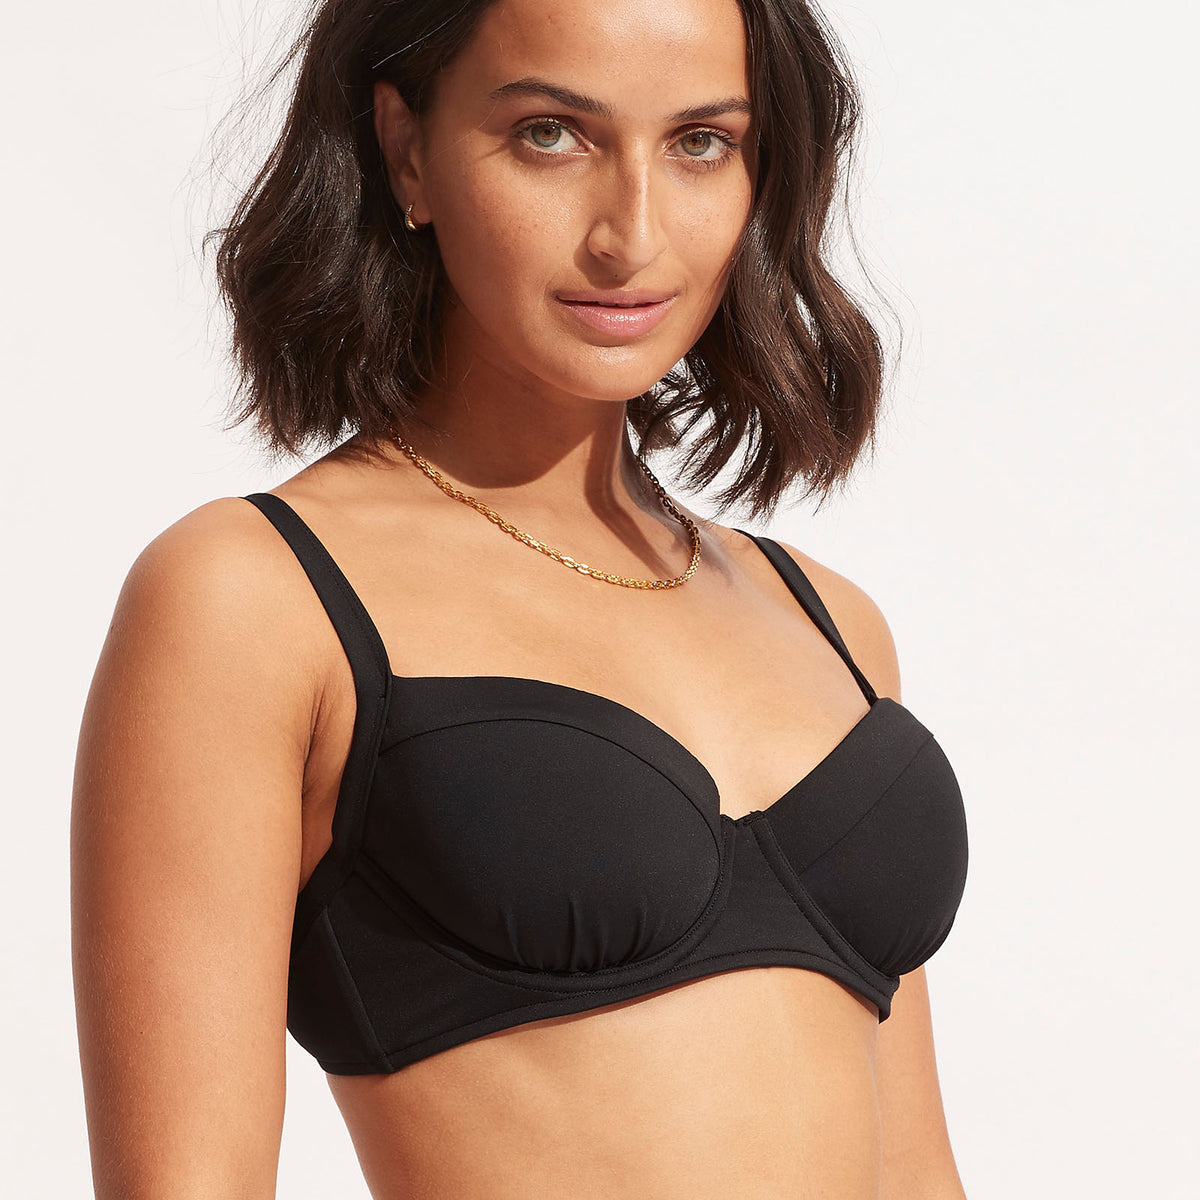 New 201202 Womens Natural Silk Convertible Bra 88% Density, 12% Spandex  Wire, Unpadded, Everyday Wear White/Black/Pink From Dou05, $15.09